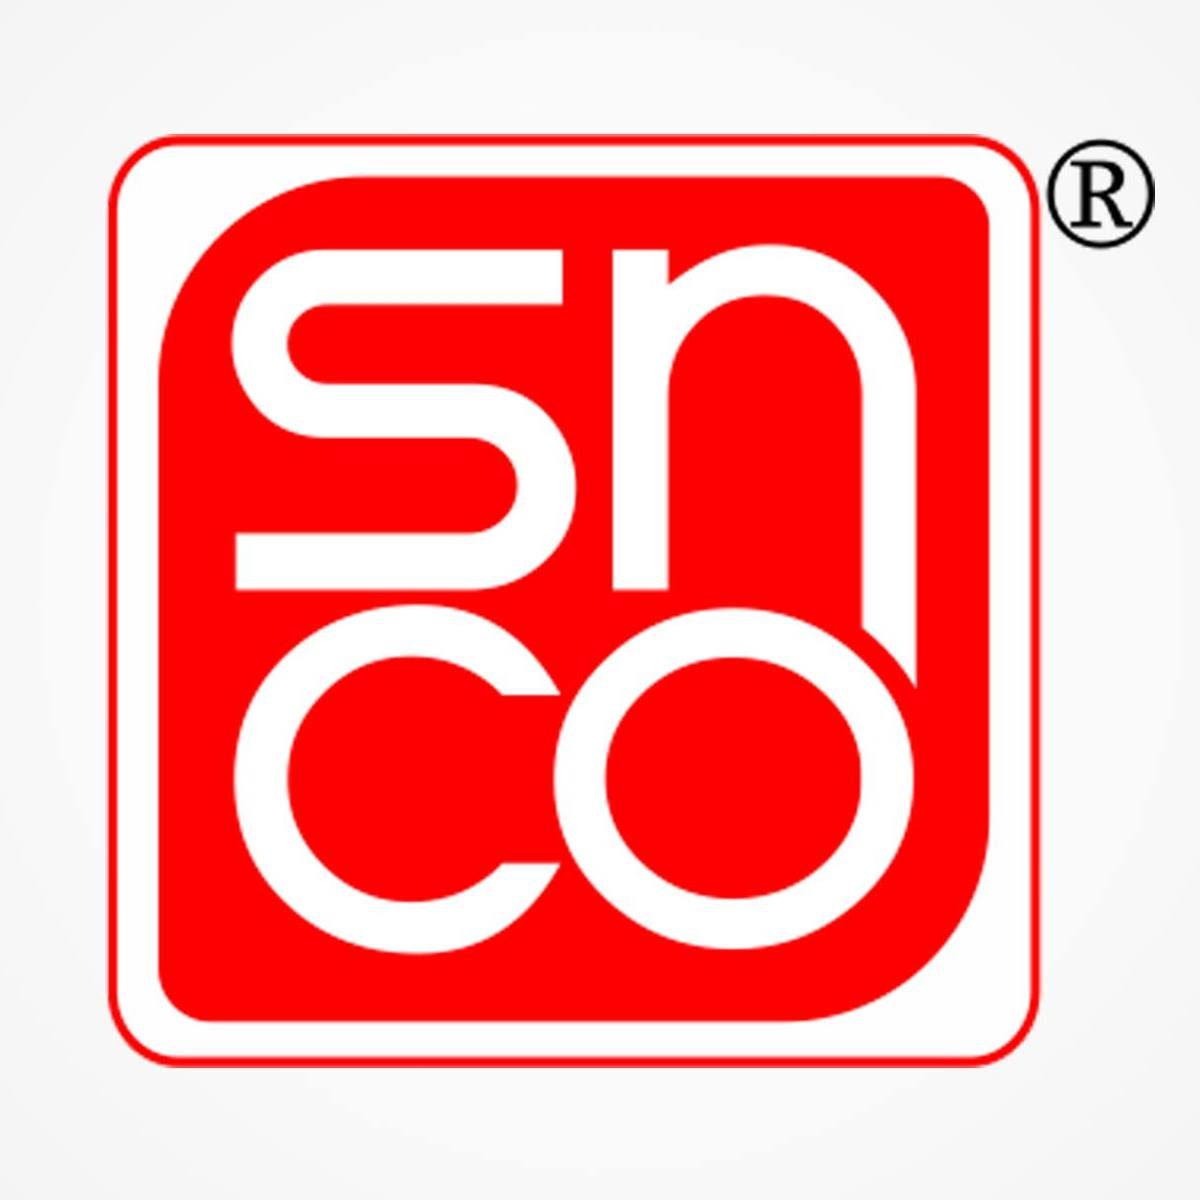 SNCO|Accounting Services|Professional Services